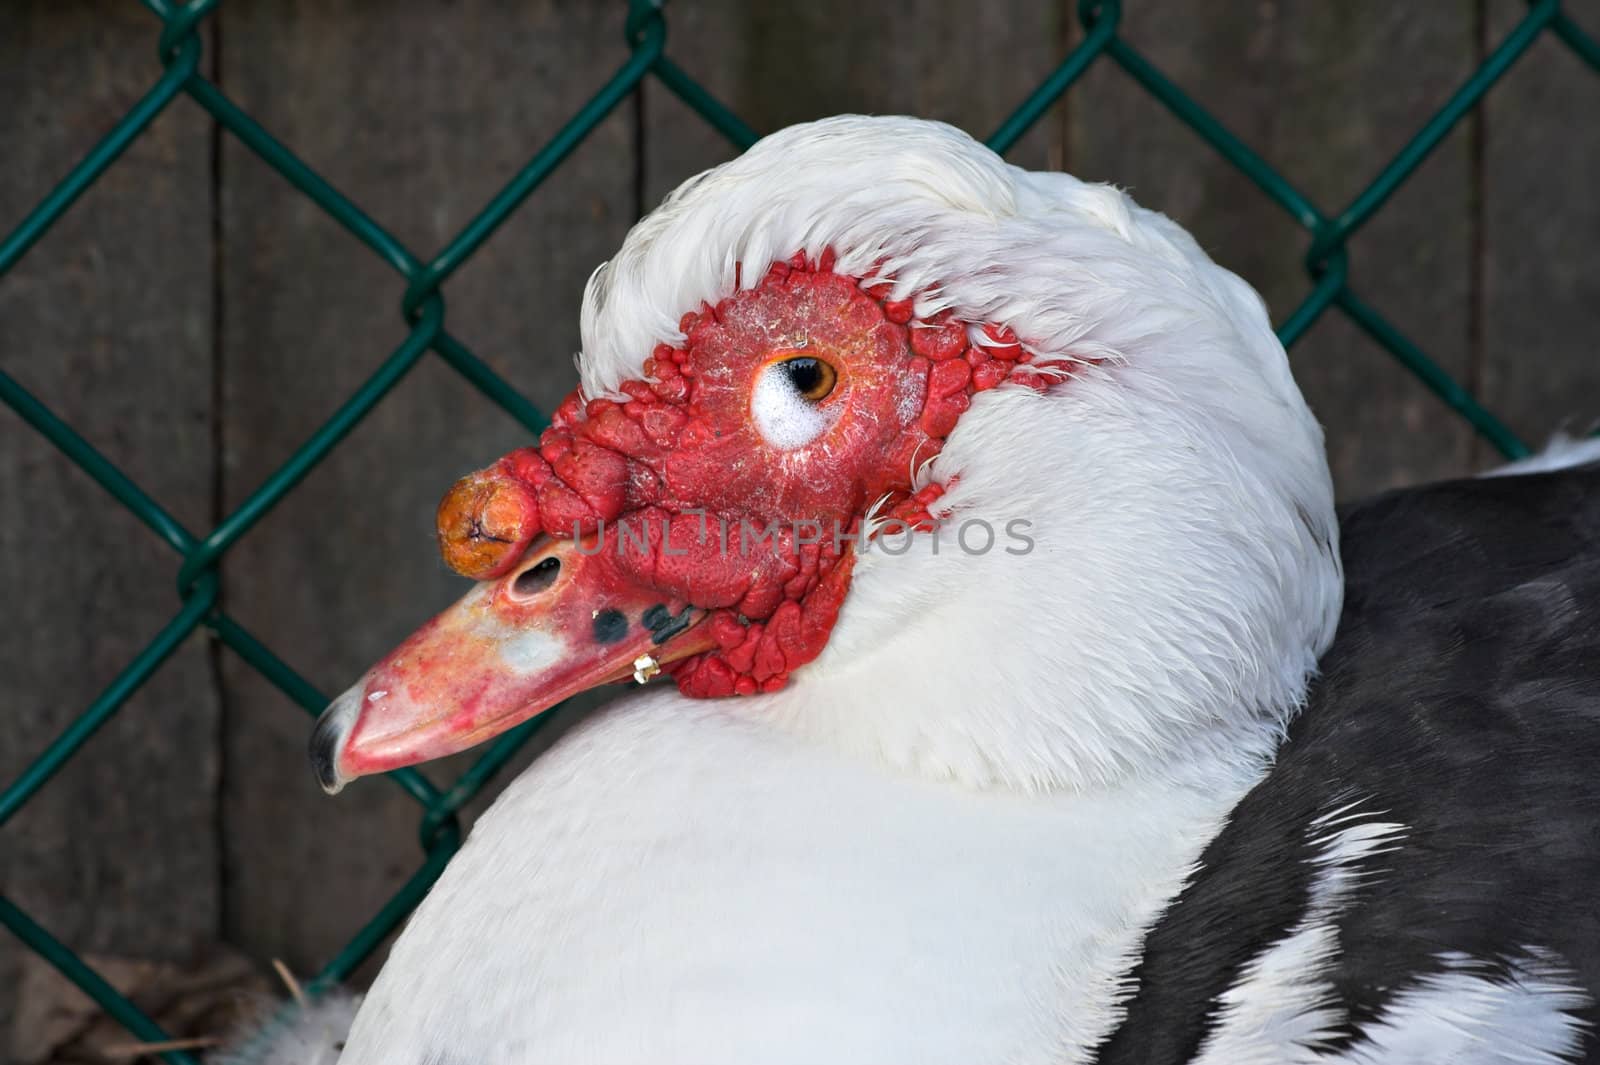 A muscovy duck sitting in front of a fence